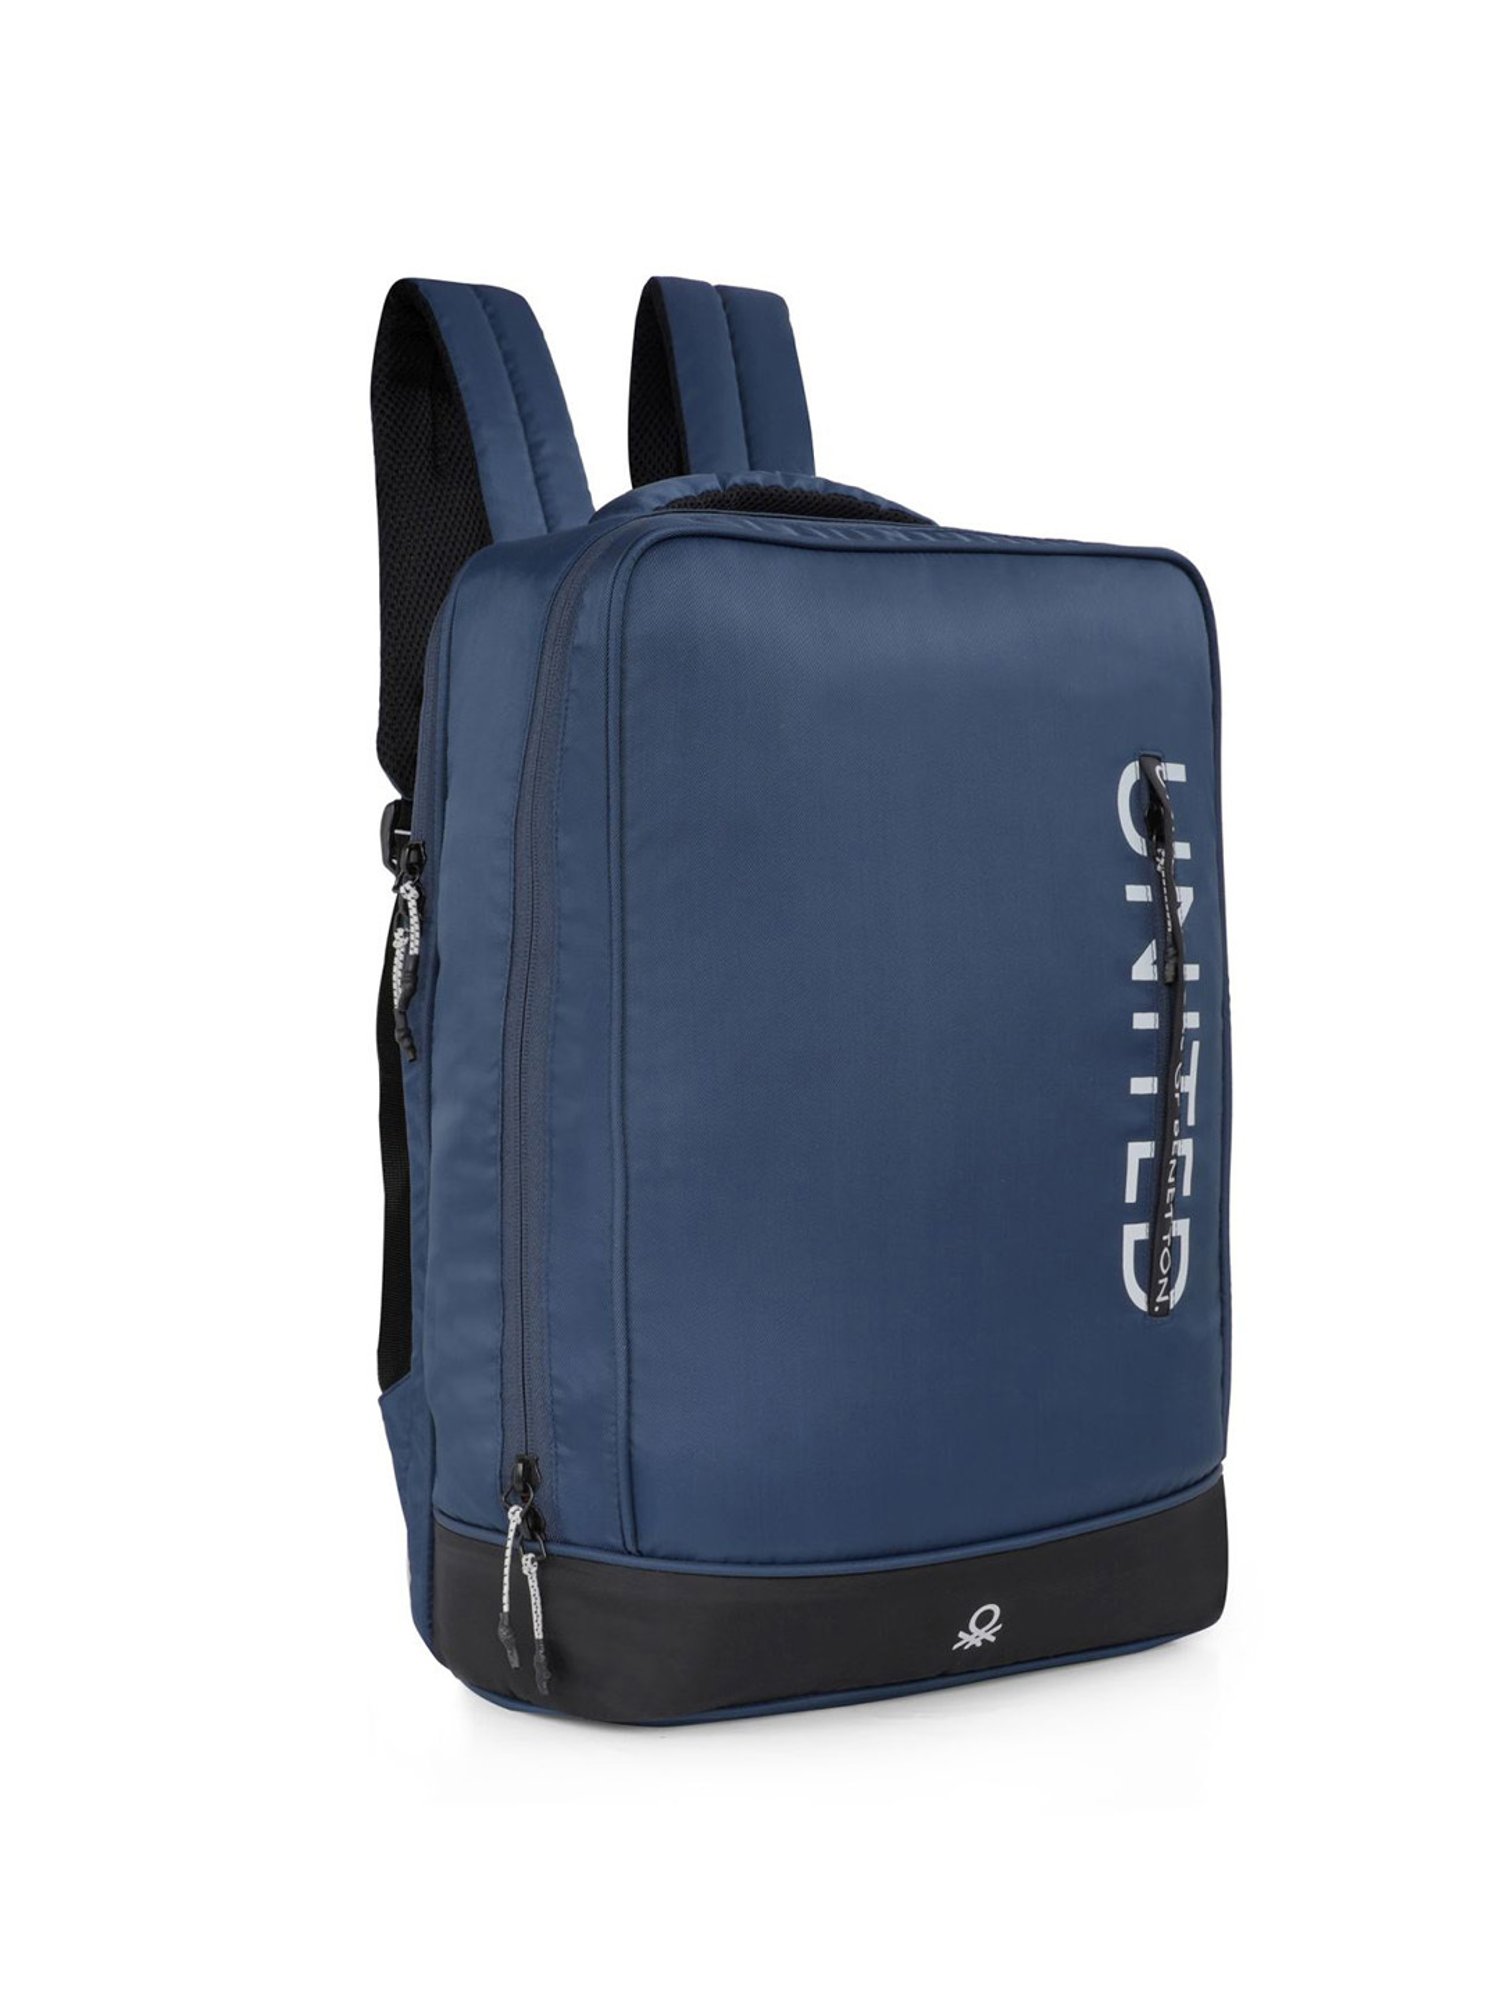 Buy United Colors of Benetton Easton 22 Ltrs Navy Laptop Backpack Online At  Best Price @ Tata CLiQ